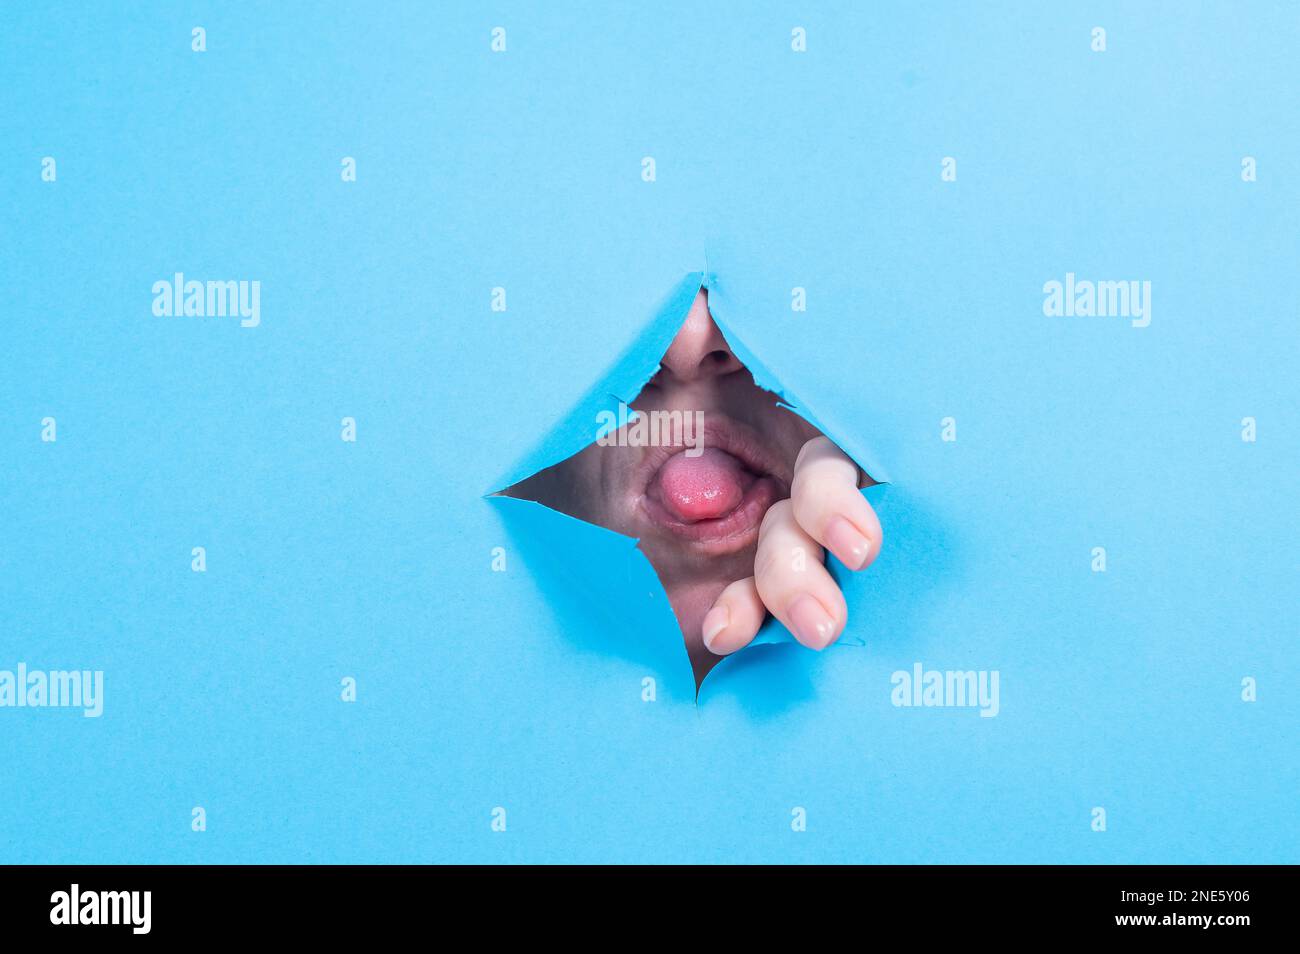 Woman sticking her tongue out of a hole on blue paper background.  Stock Photo